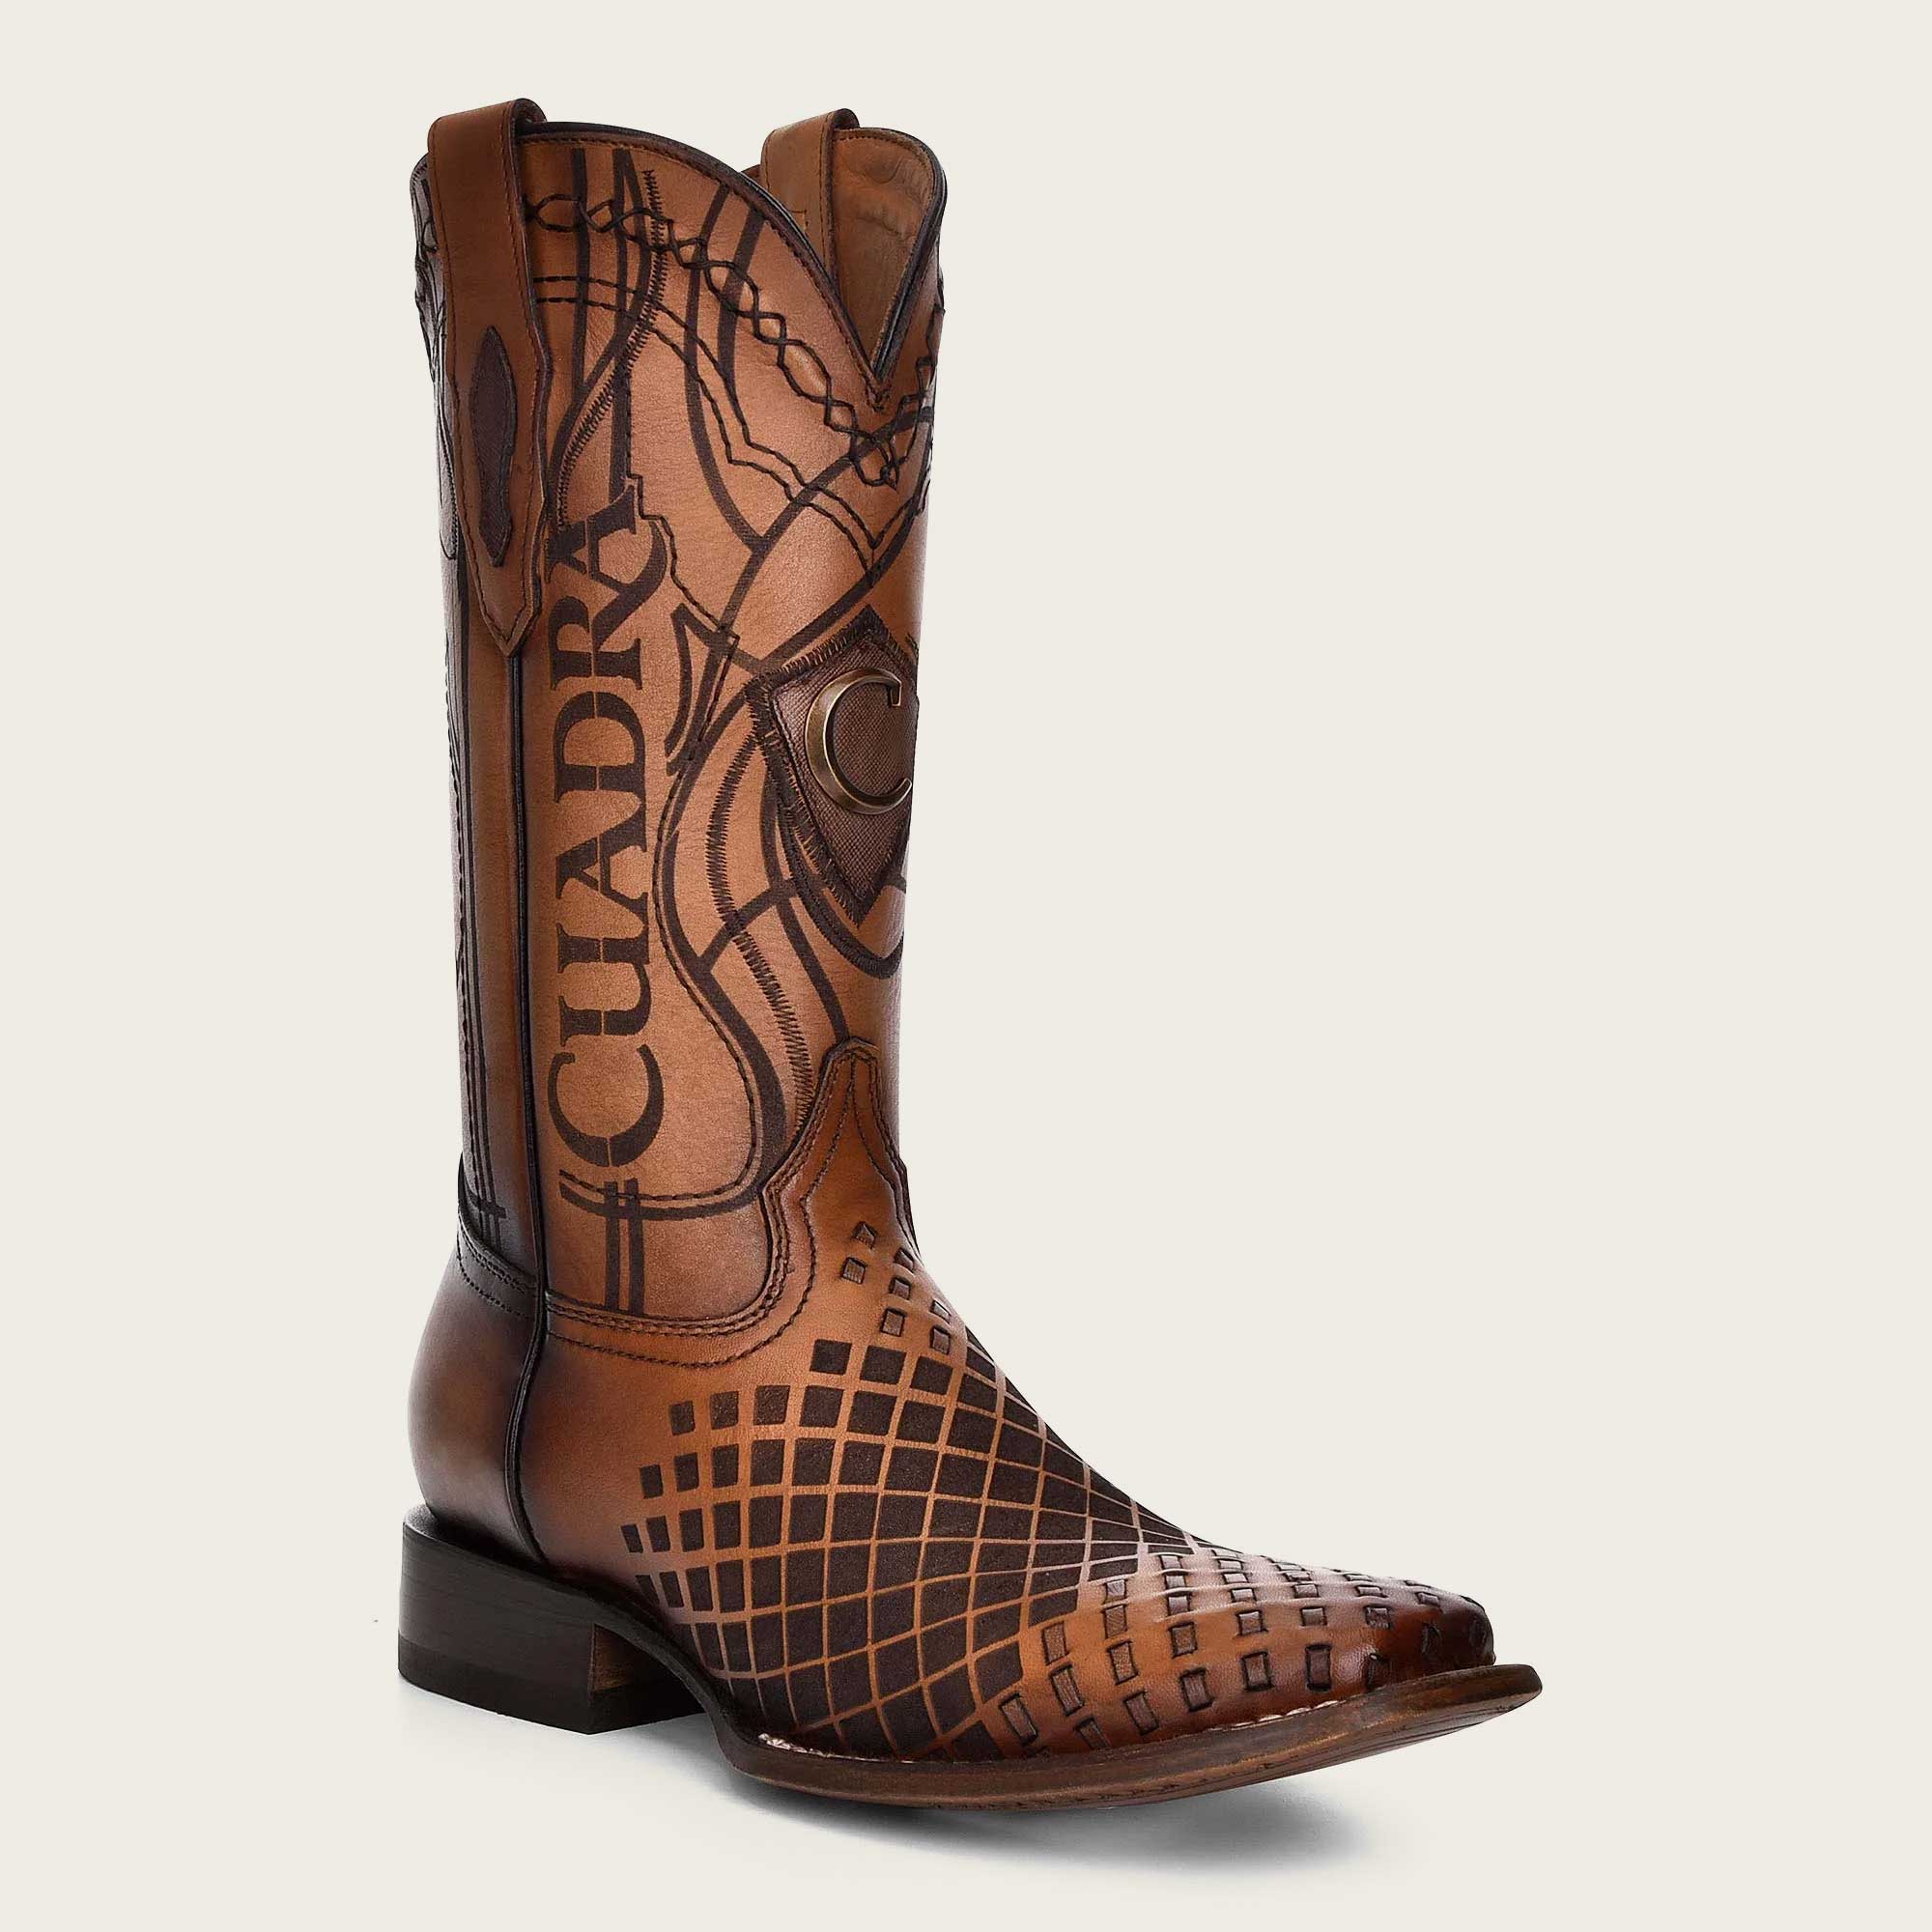 Engraved honey leather western boots